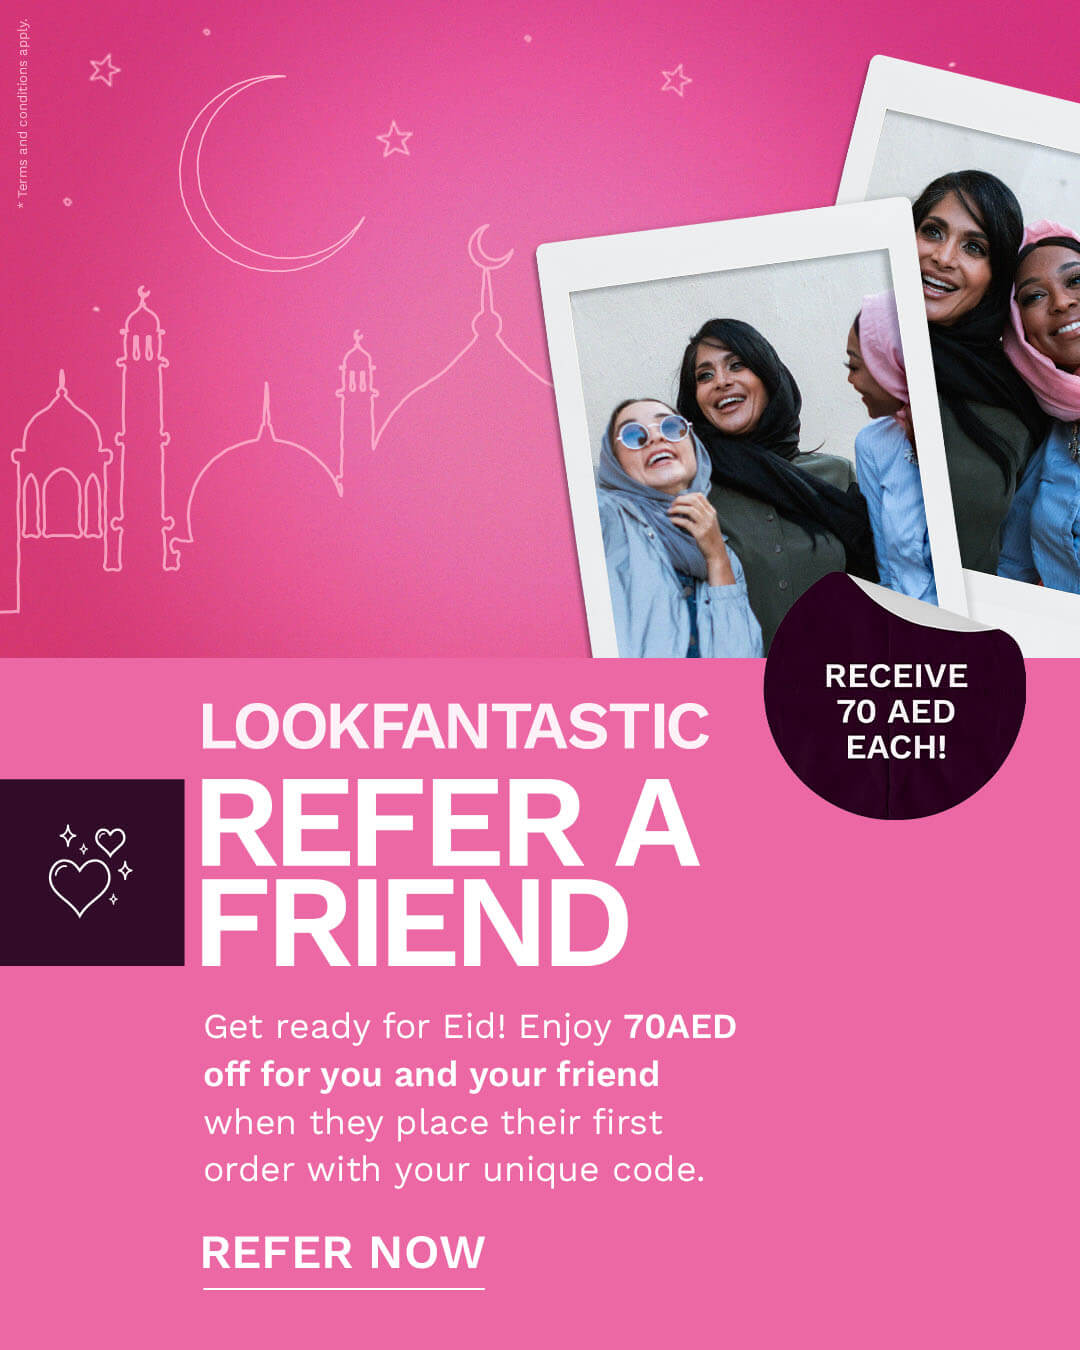  LOOKFANTASTIC REFER A FRIEND Get ready for Eid! Enjoy 70AED off for you and your friend when they place their first order with your unique code. REFER NOW 